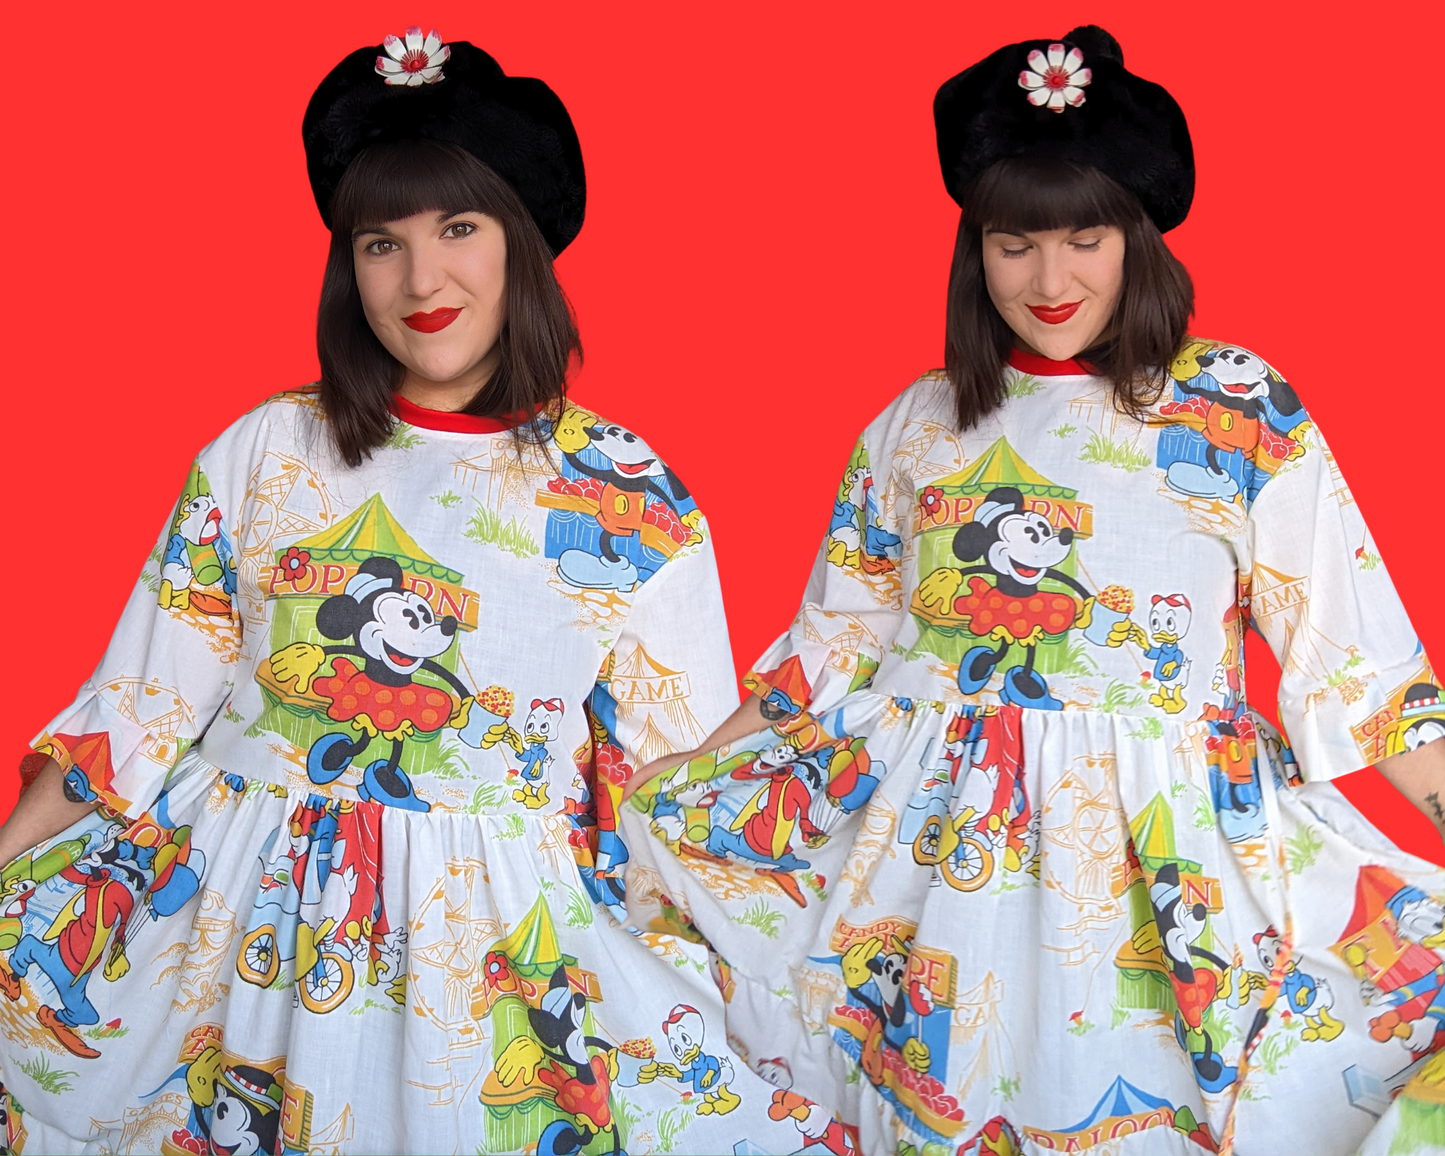 Handmade, Upcycled Disney Mickey Mouse and the Gang at The Carnival Bedsheet T-Shirt Dress Fits S-M-L-XL